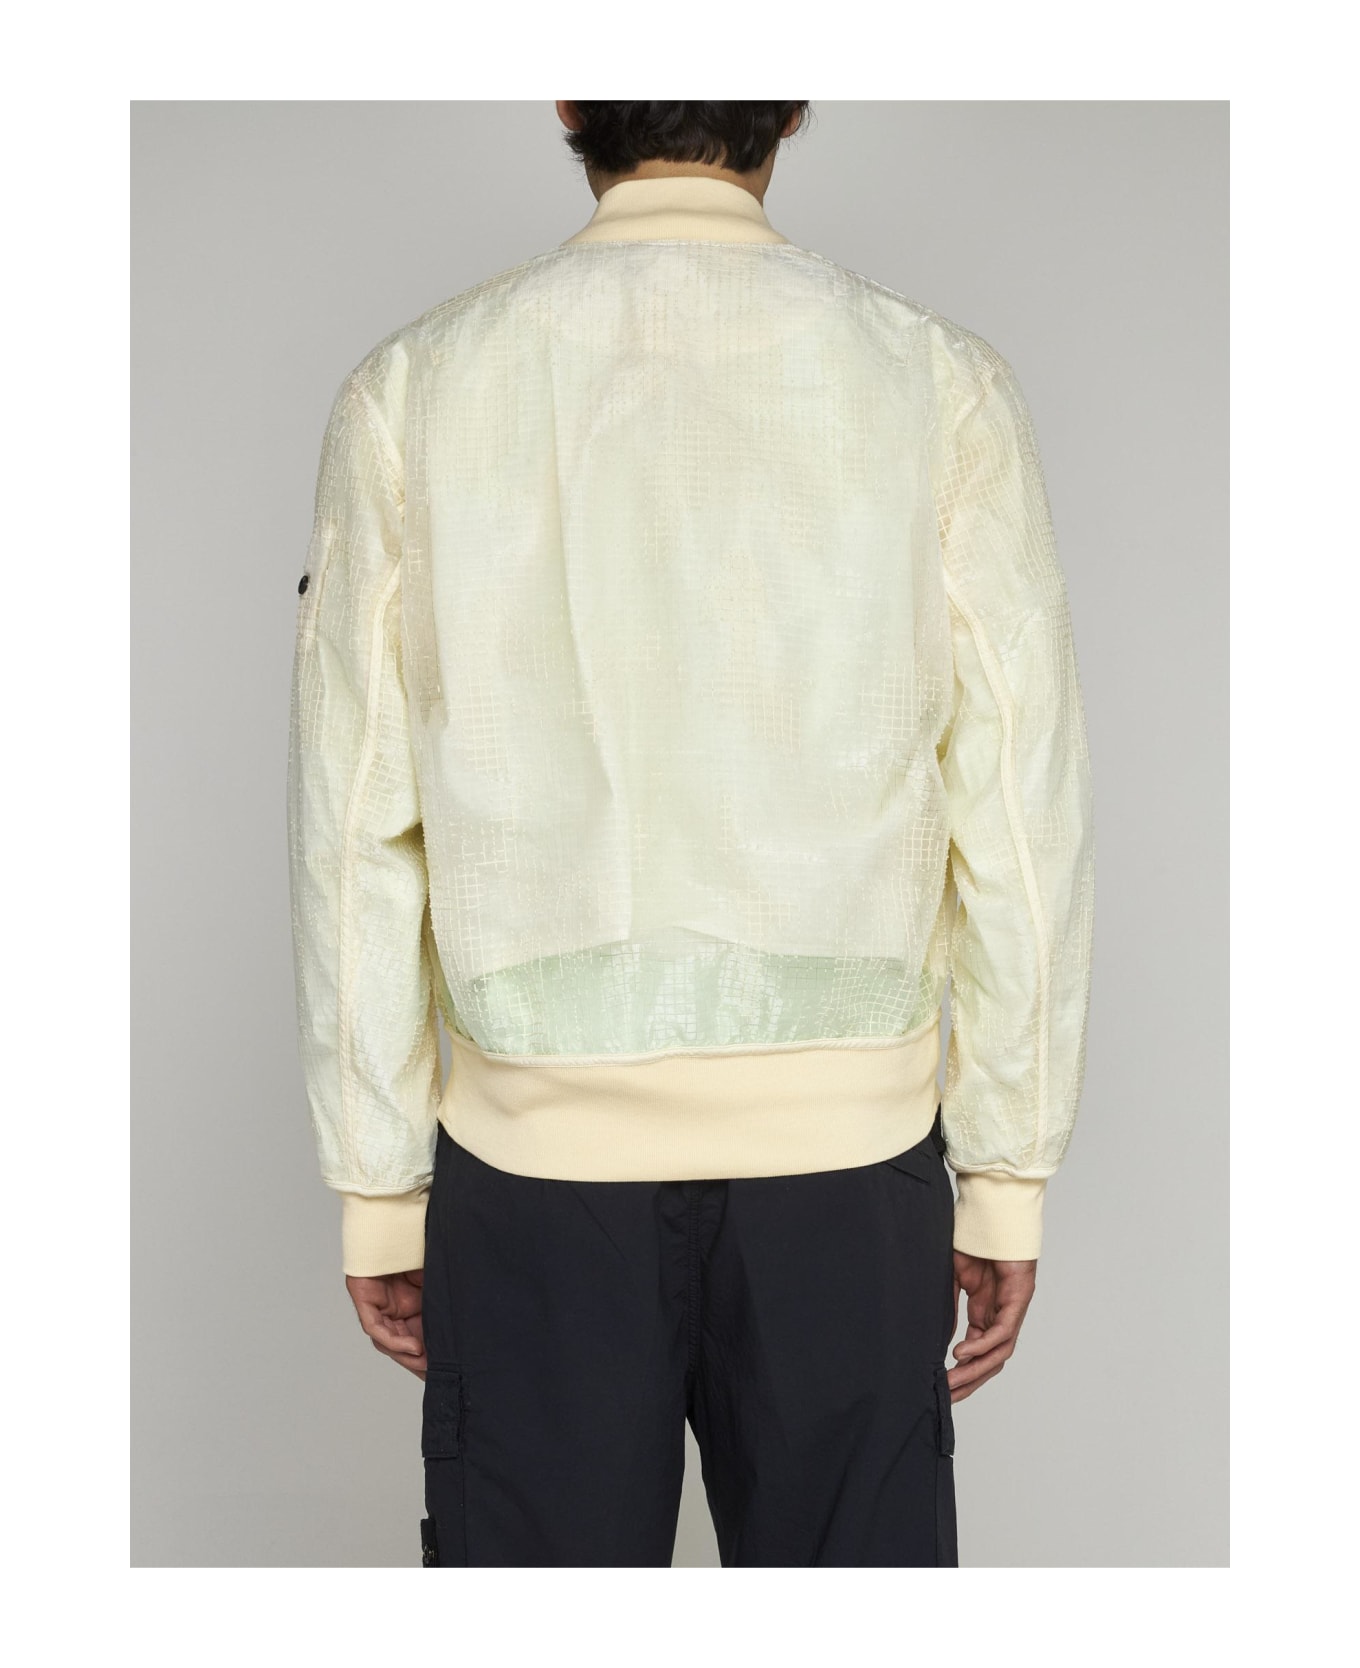 Stone Island Shadow Project Technical Cotton Blend Bomber Jacket - Pale yellow